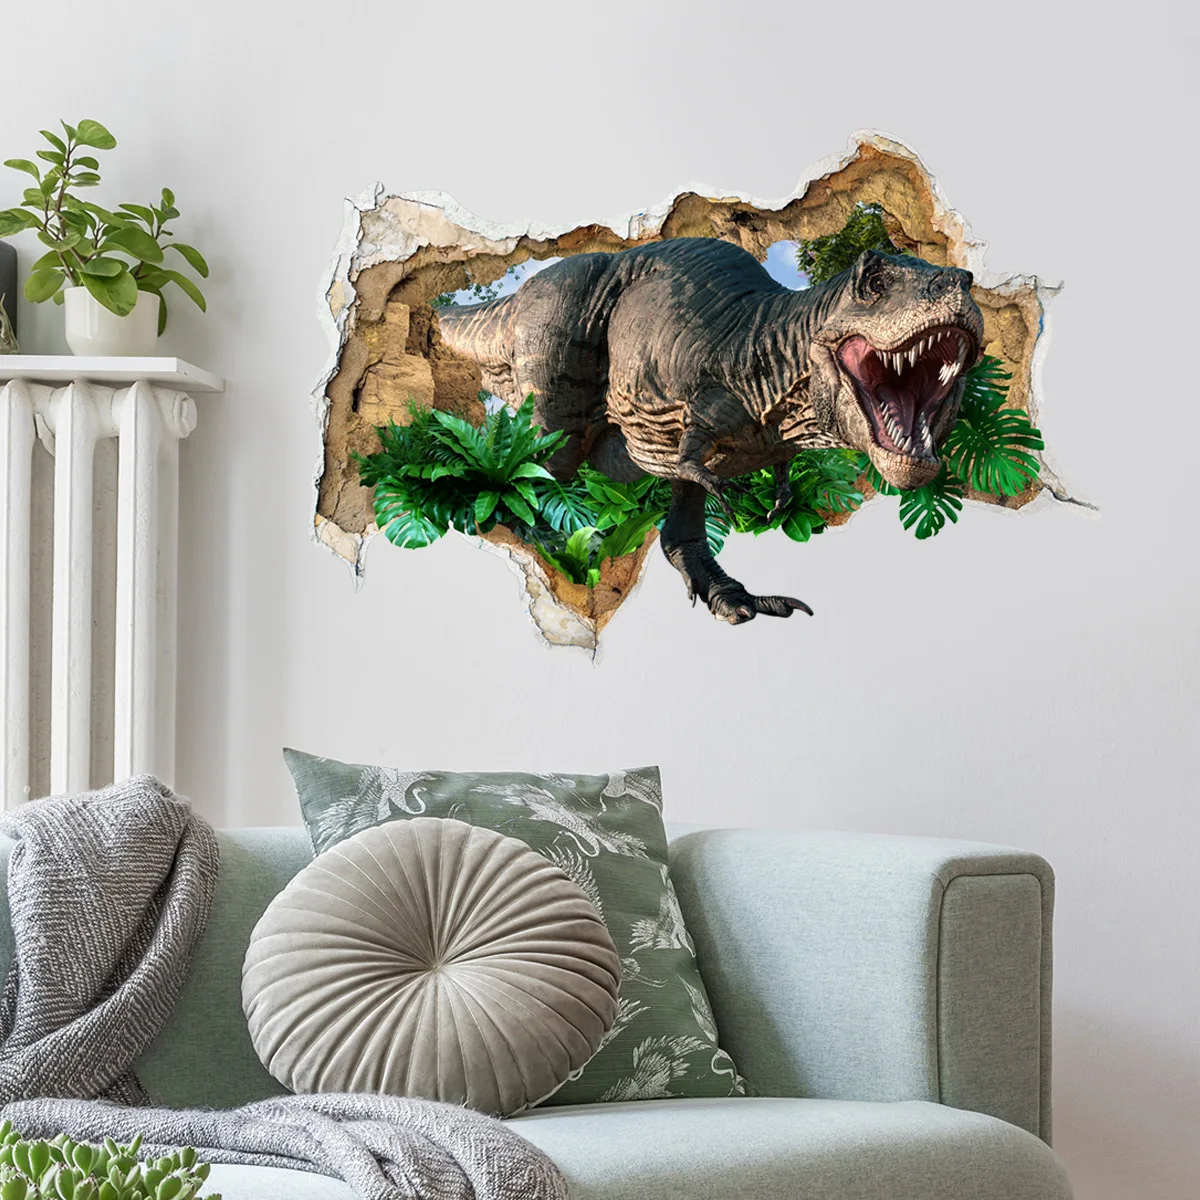 40*60cm Broken Wall Dinosaur Decorative Painting Wall Stickers Background Wall Home Decoration Wall Stickers Wallpaper Atw6009 aluminum foil self adhesive wallpaper commercial clothing store thickened home decoration waterproof anti scalding wall sticker